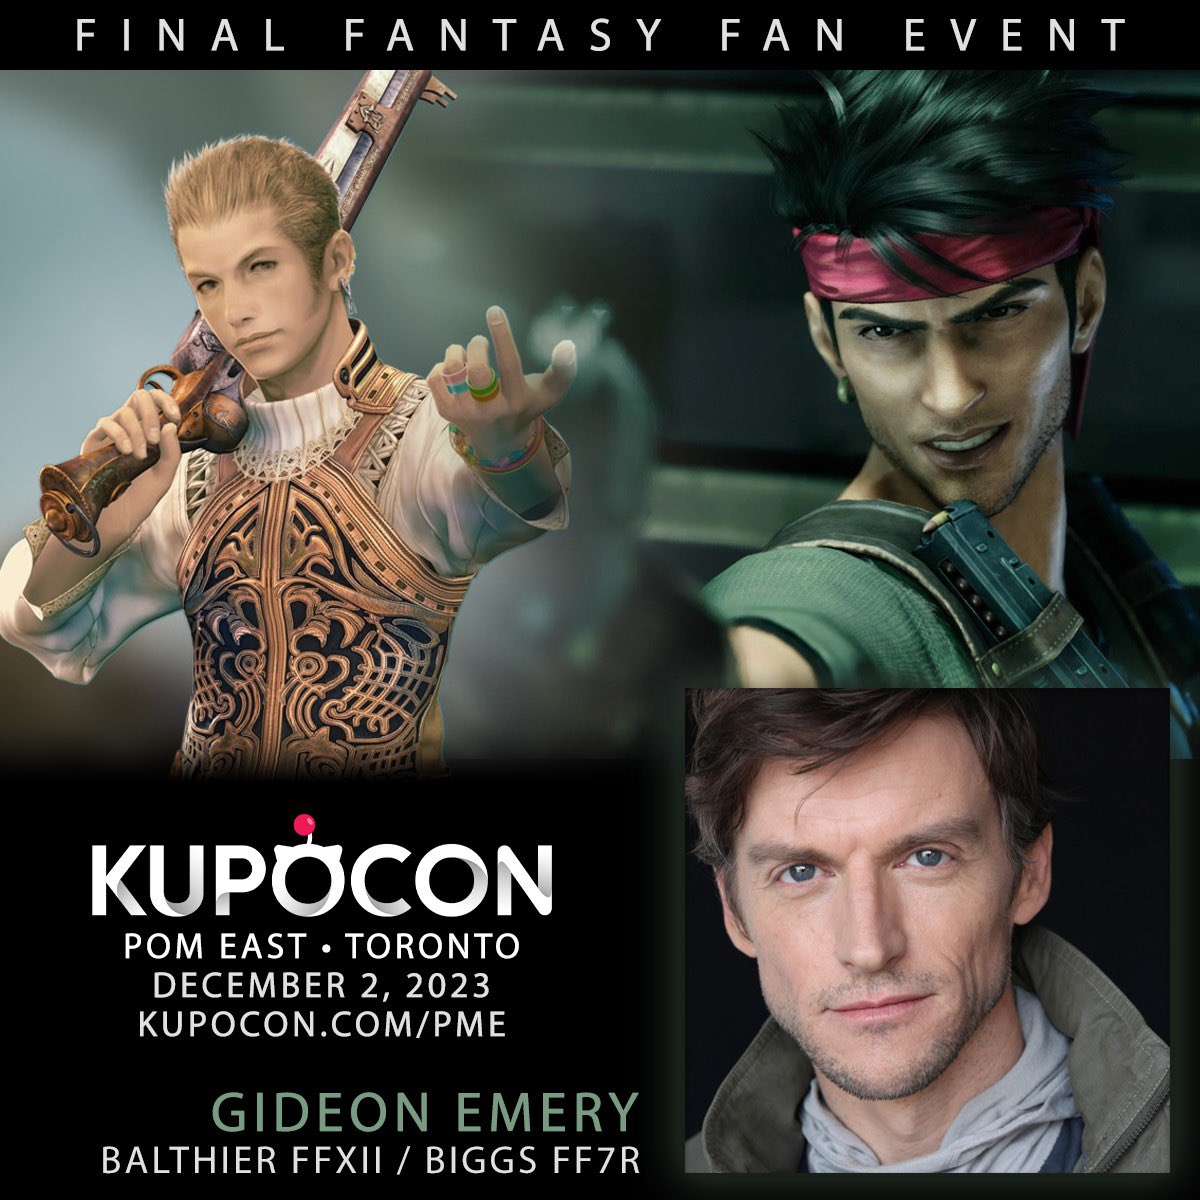 Thrilled to share that Balthier, Biggs and I will be at @KupoConEN Toronto in December!